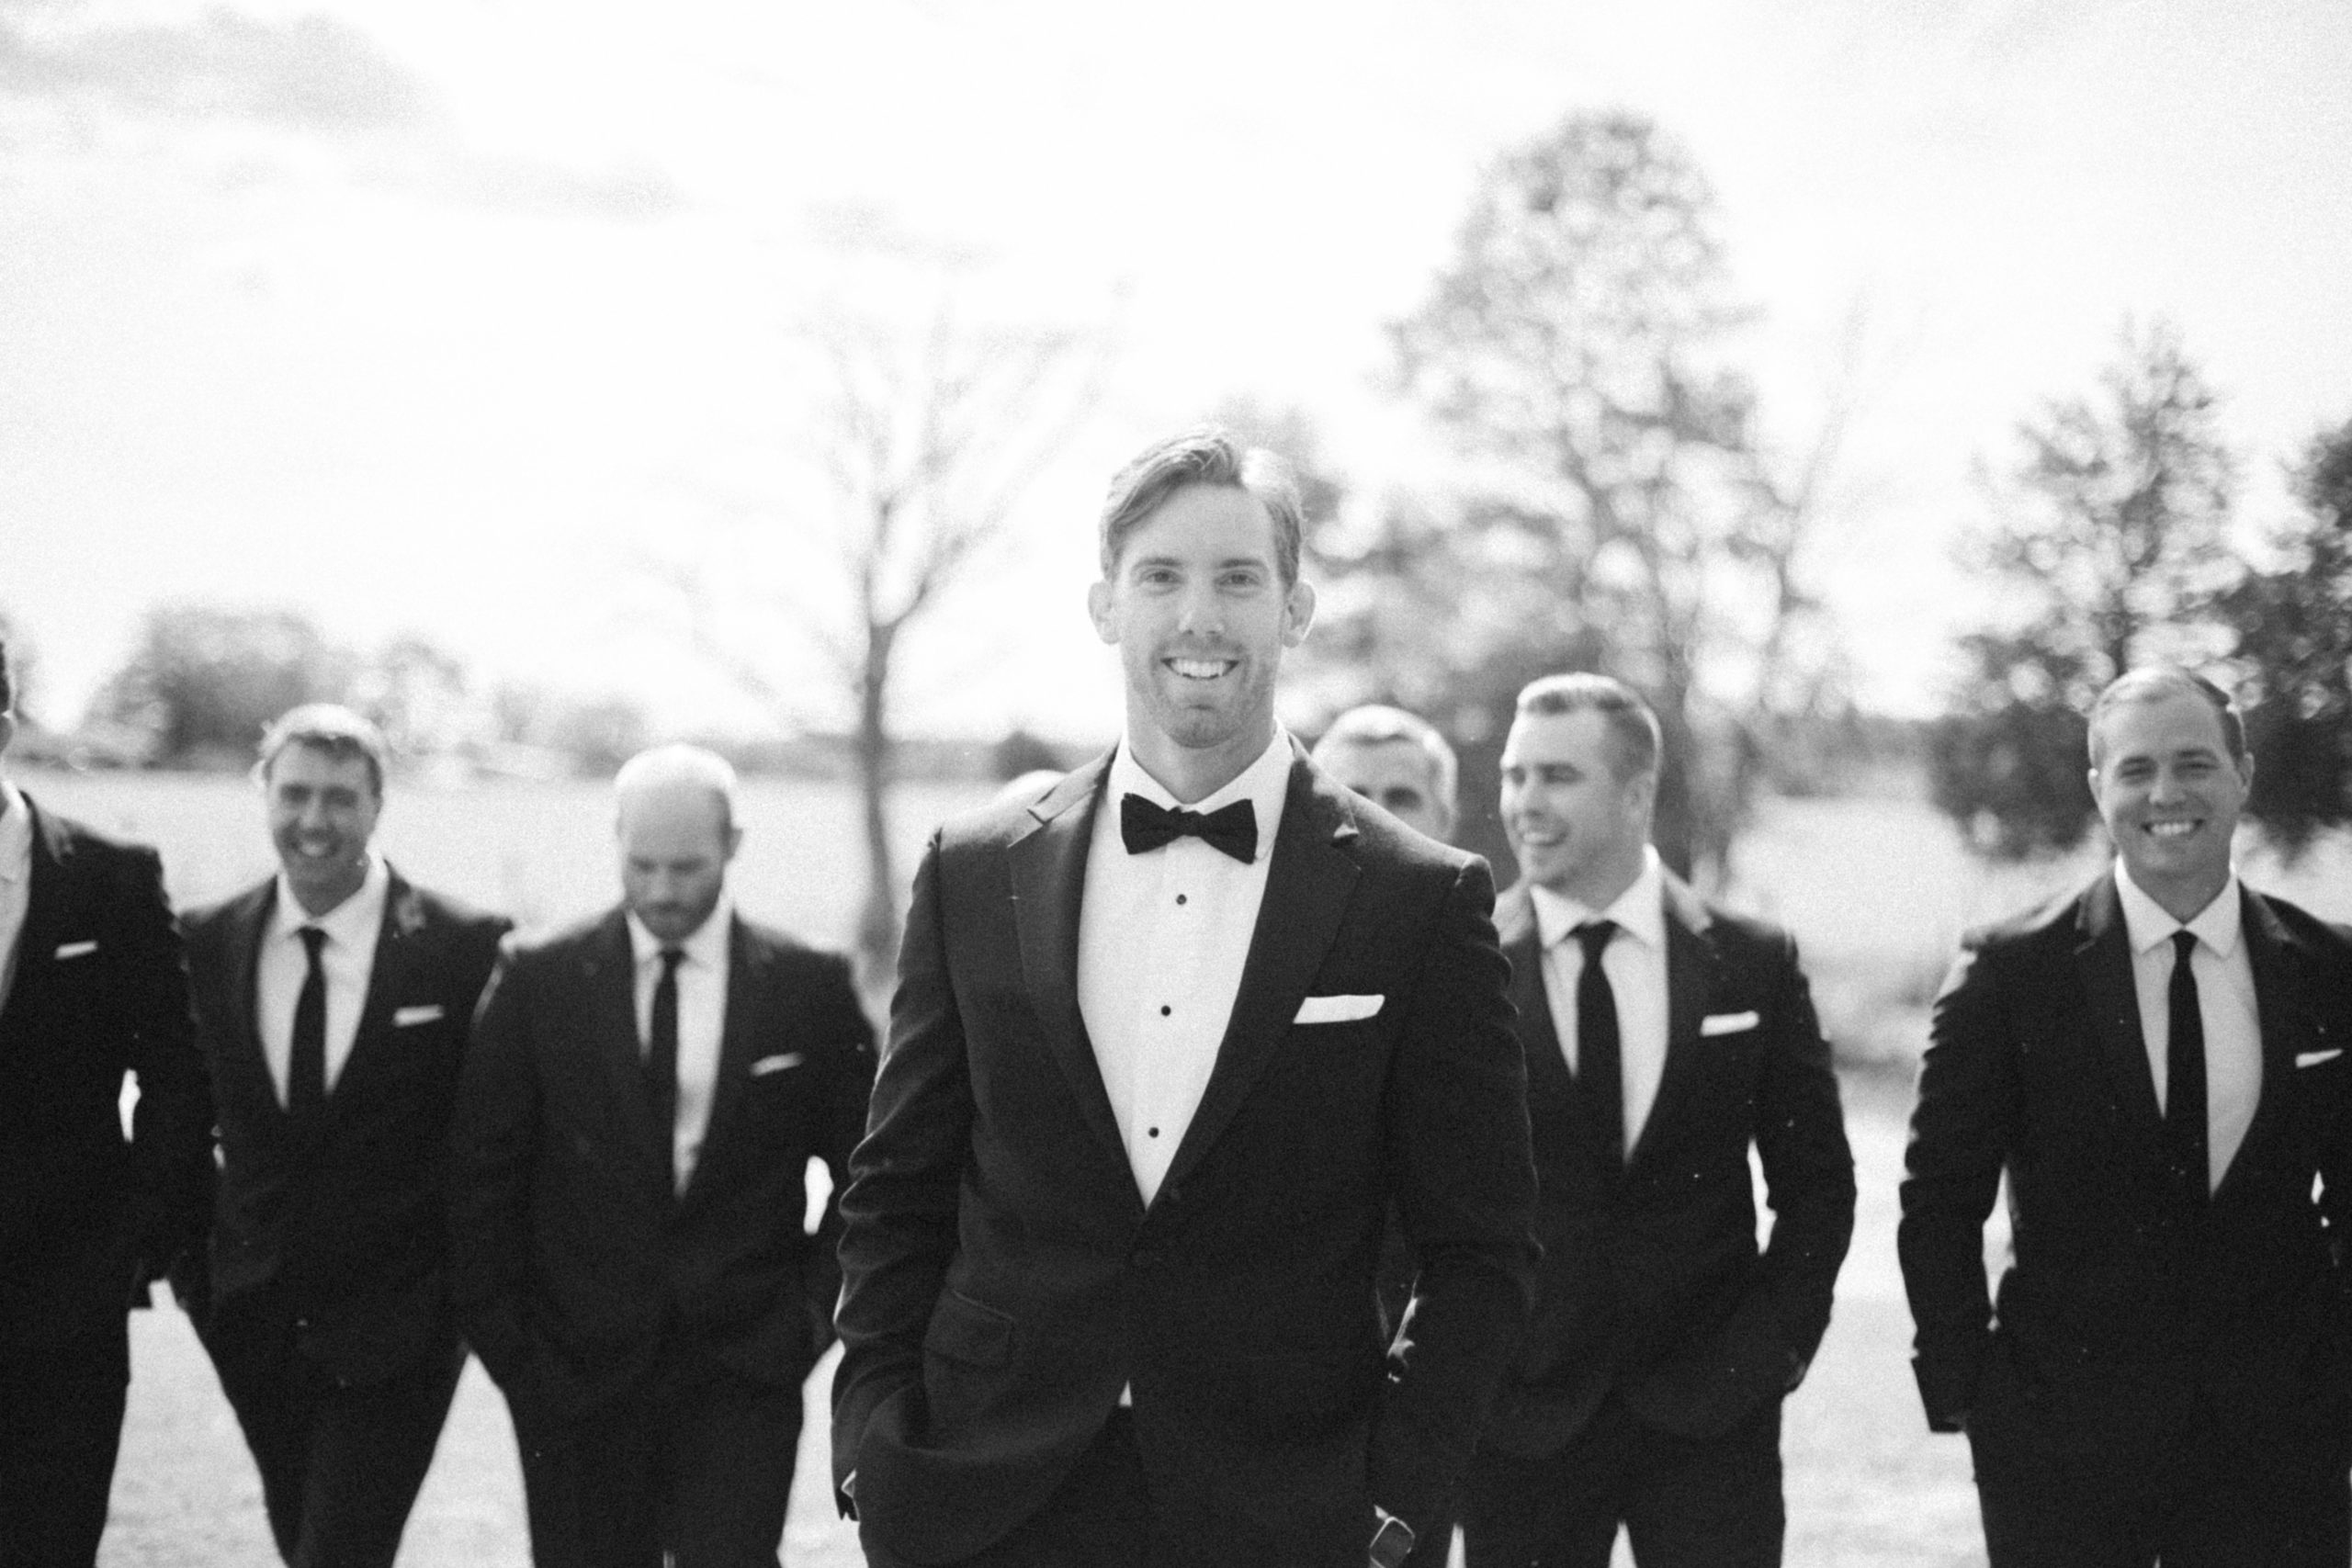 groom walking with his groomsmen in a field and smiling at the camera